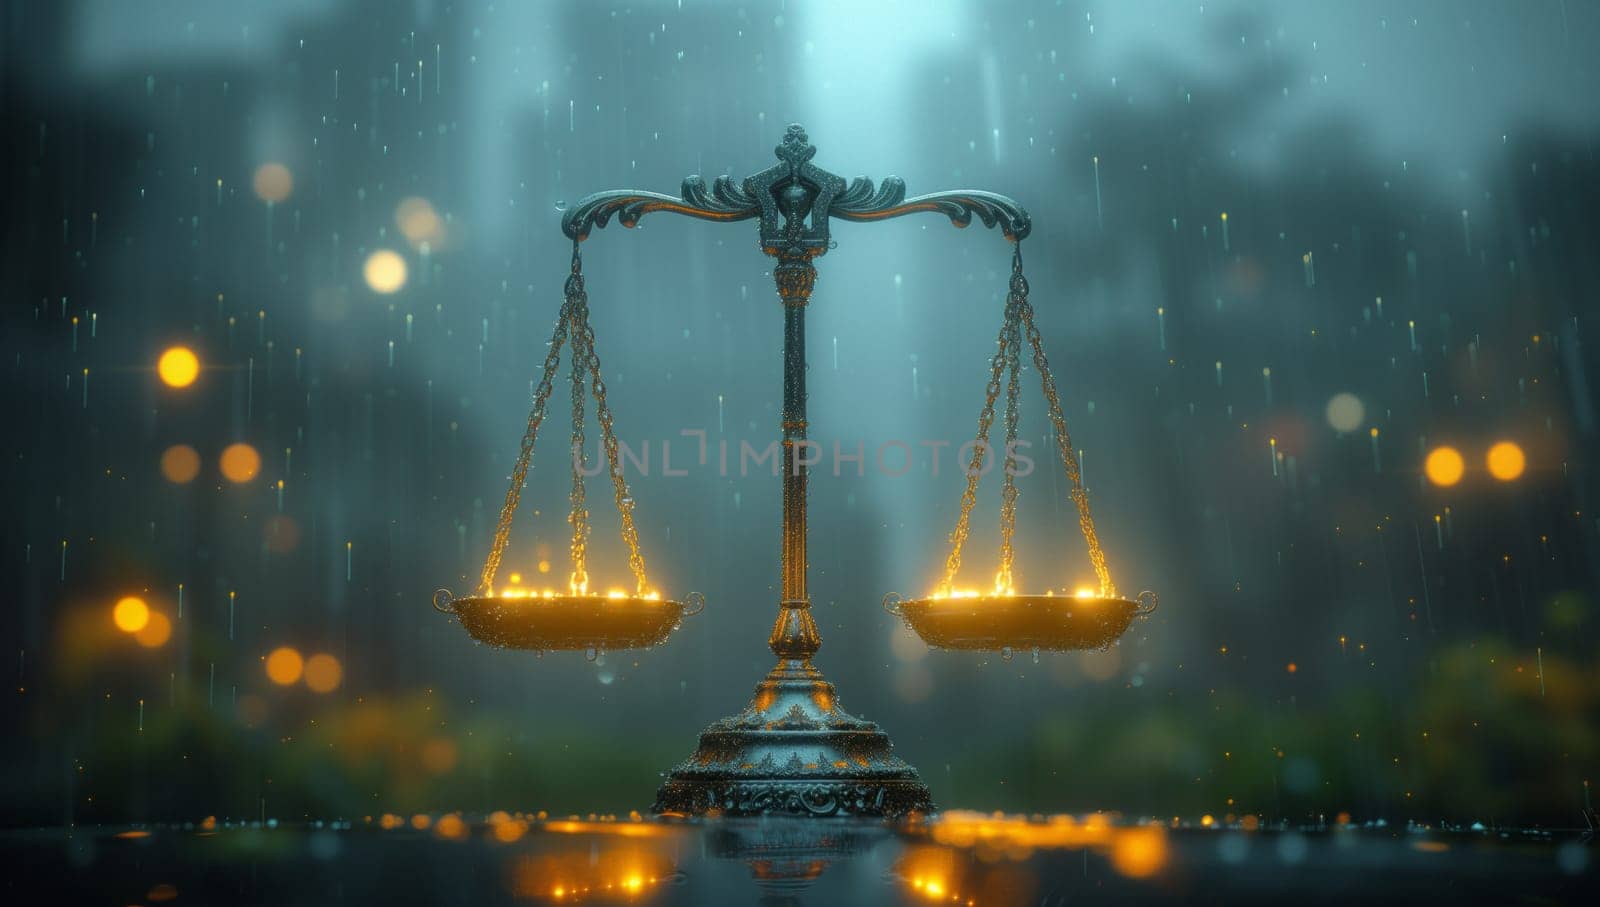 A liquid scale of justice shines in the rain, creating an electrifying event in the city. The glass drinkware glows in the darkness with a stemware font